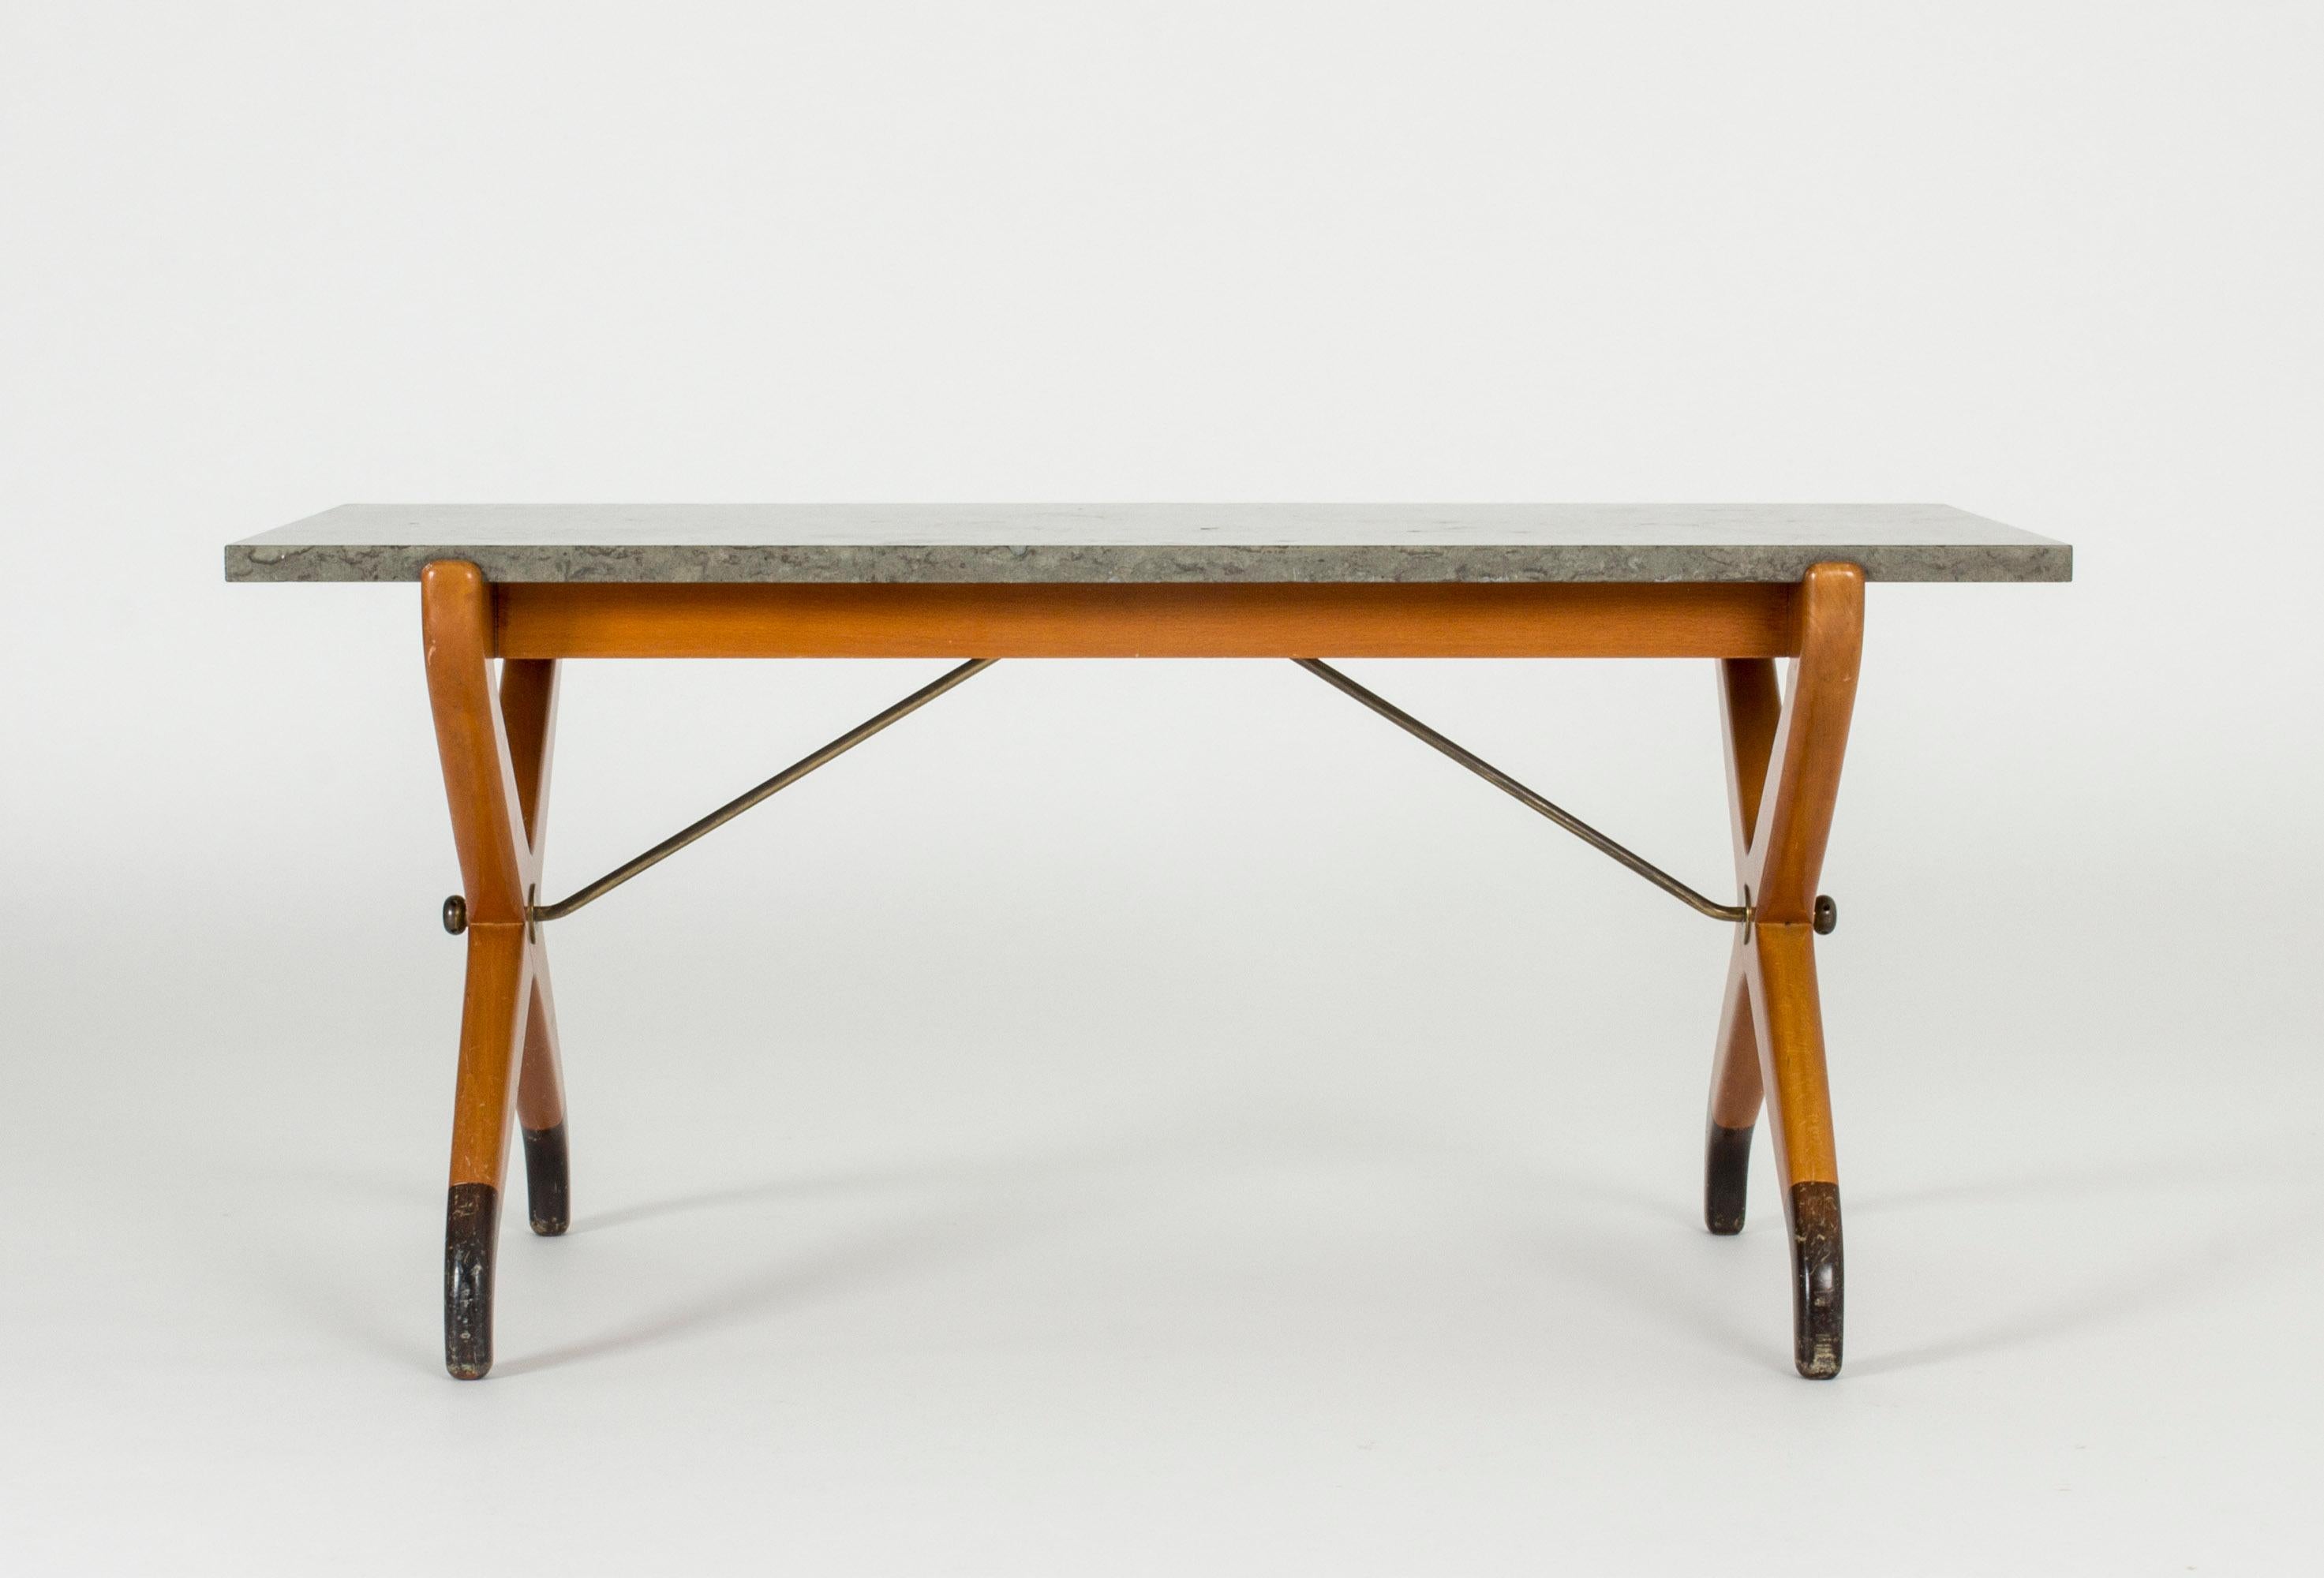 Amazing coffee table by David Rosén from the “Futura” furniture series. Beech base with crossed legs and brass extenders. Thick, heavy limestone tabletop.